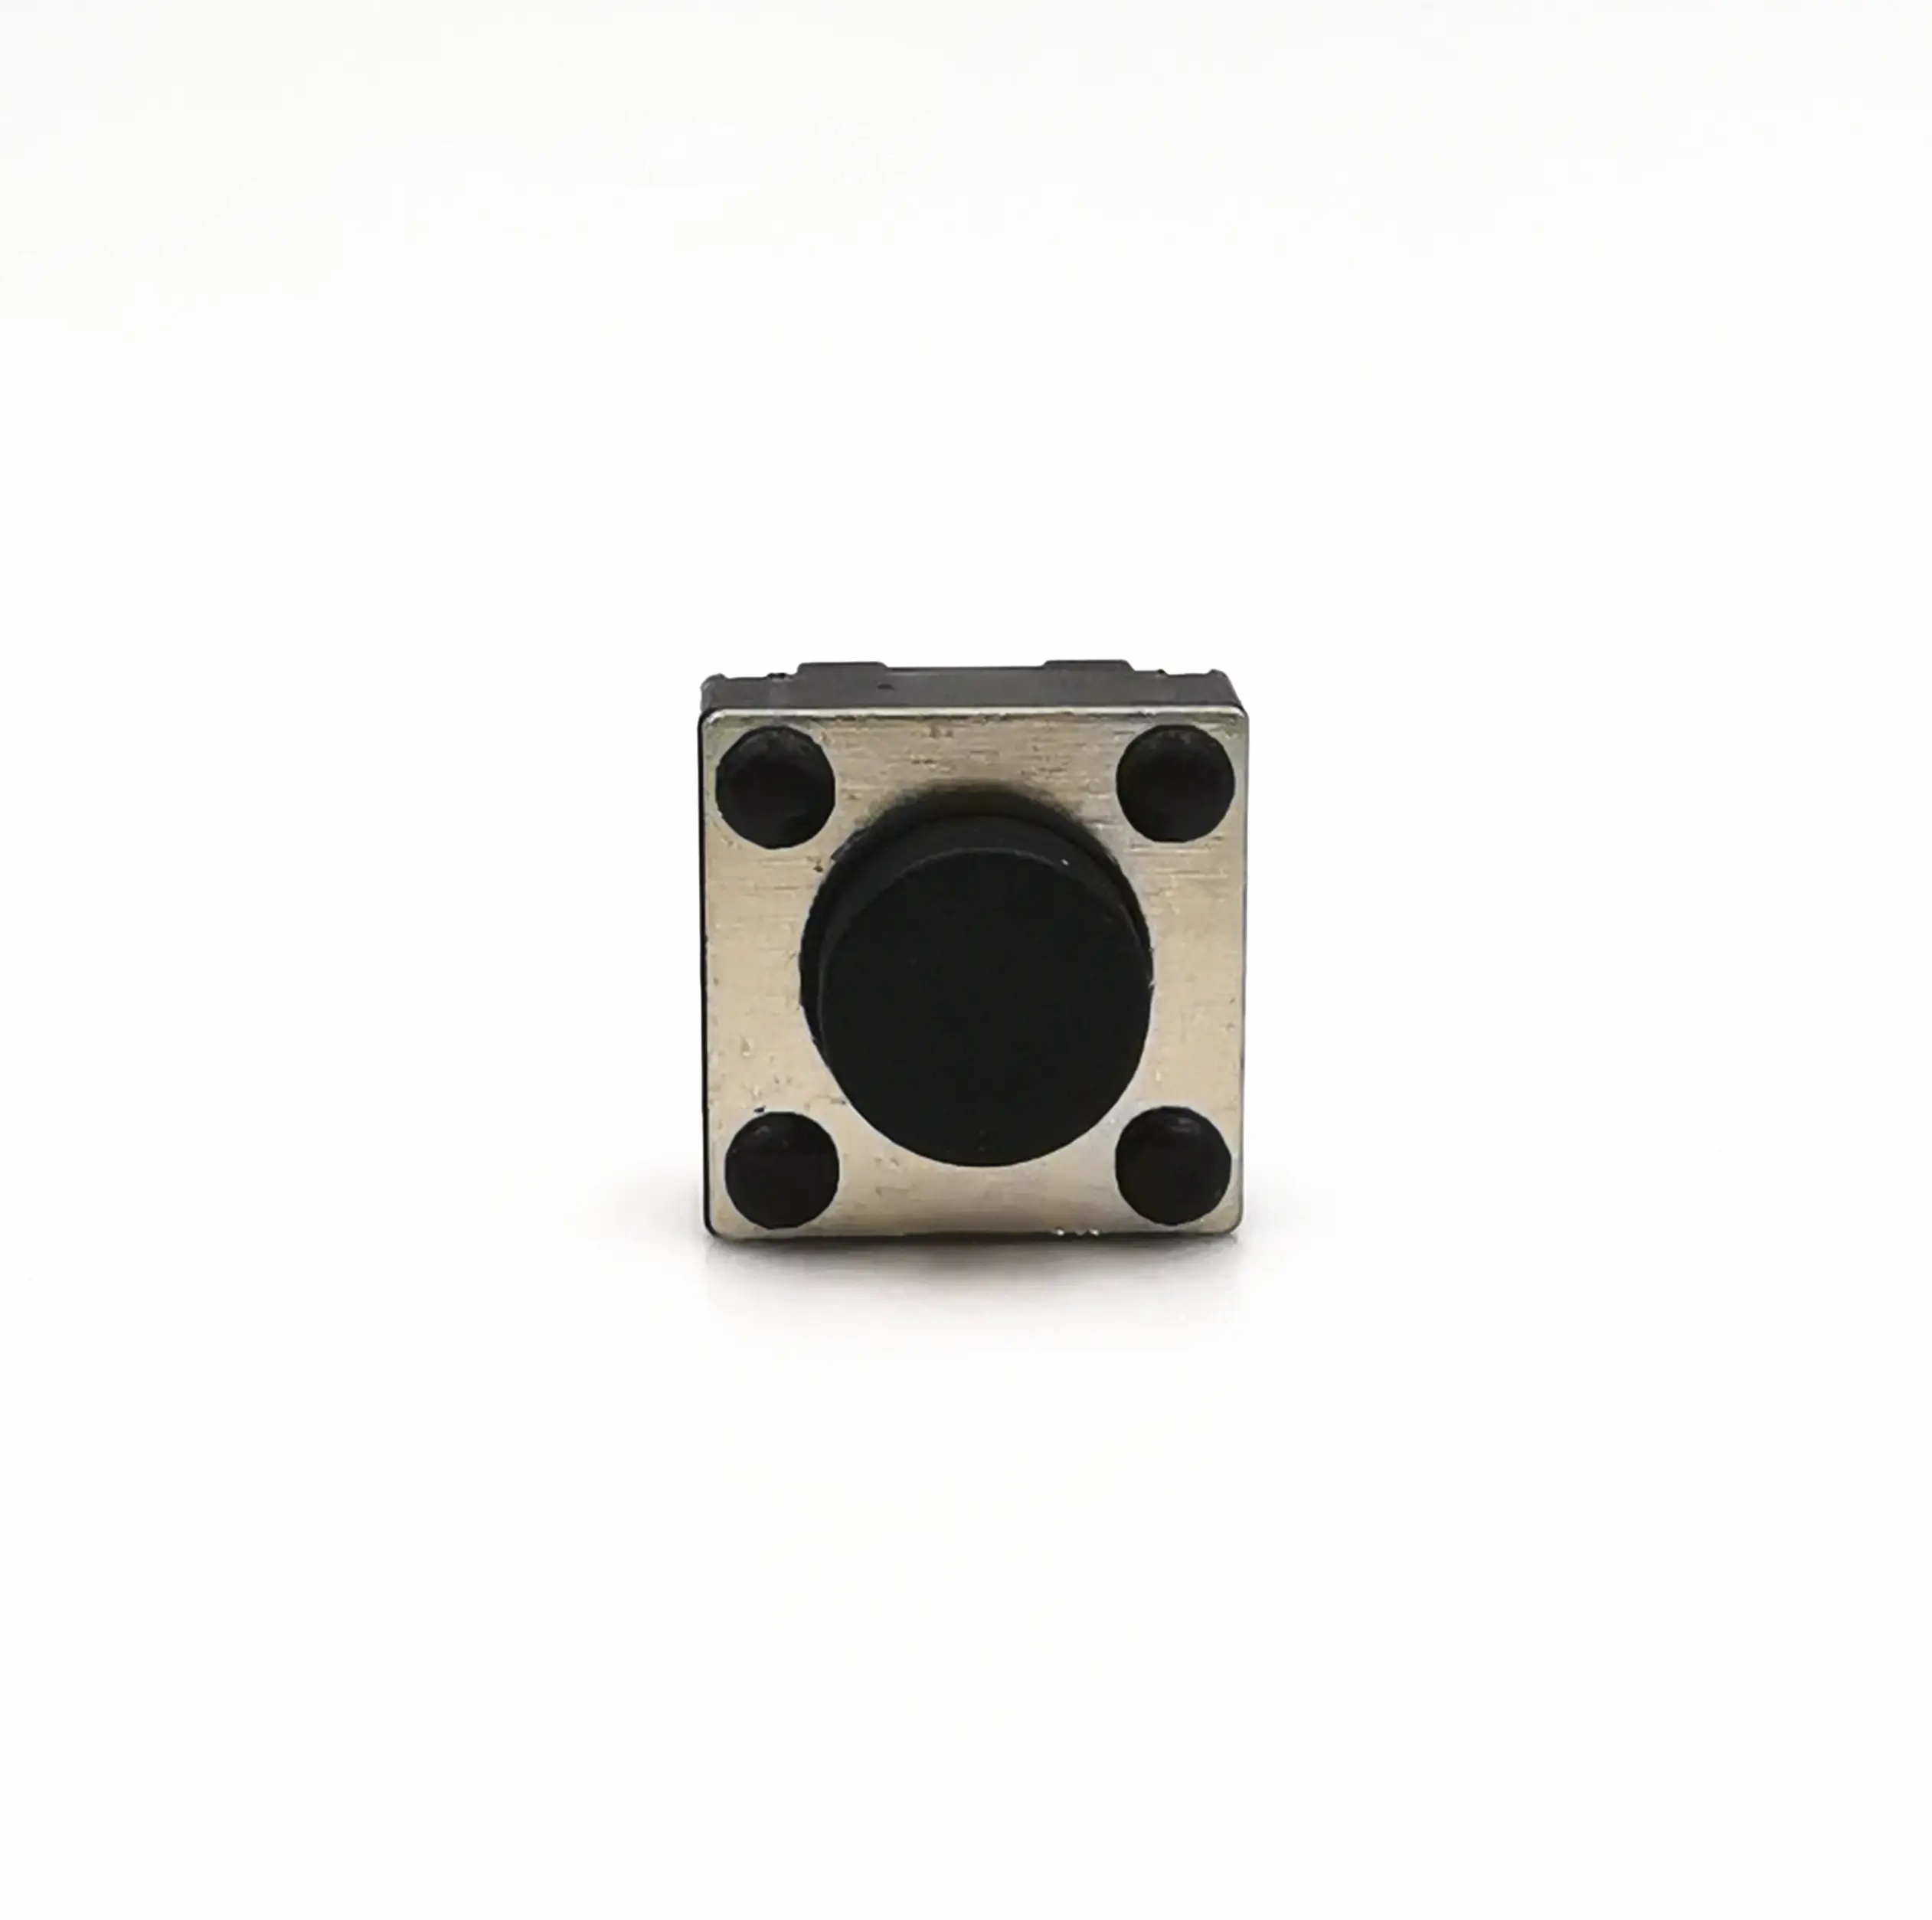 HCNHK factory directly sale 2 pin short handle 6mm switch dip momentary tactile push button smd tact switch